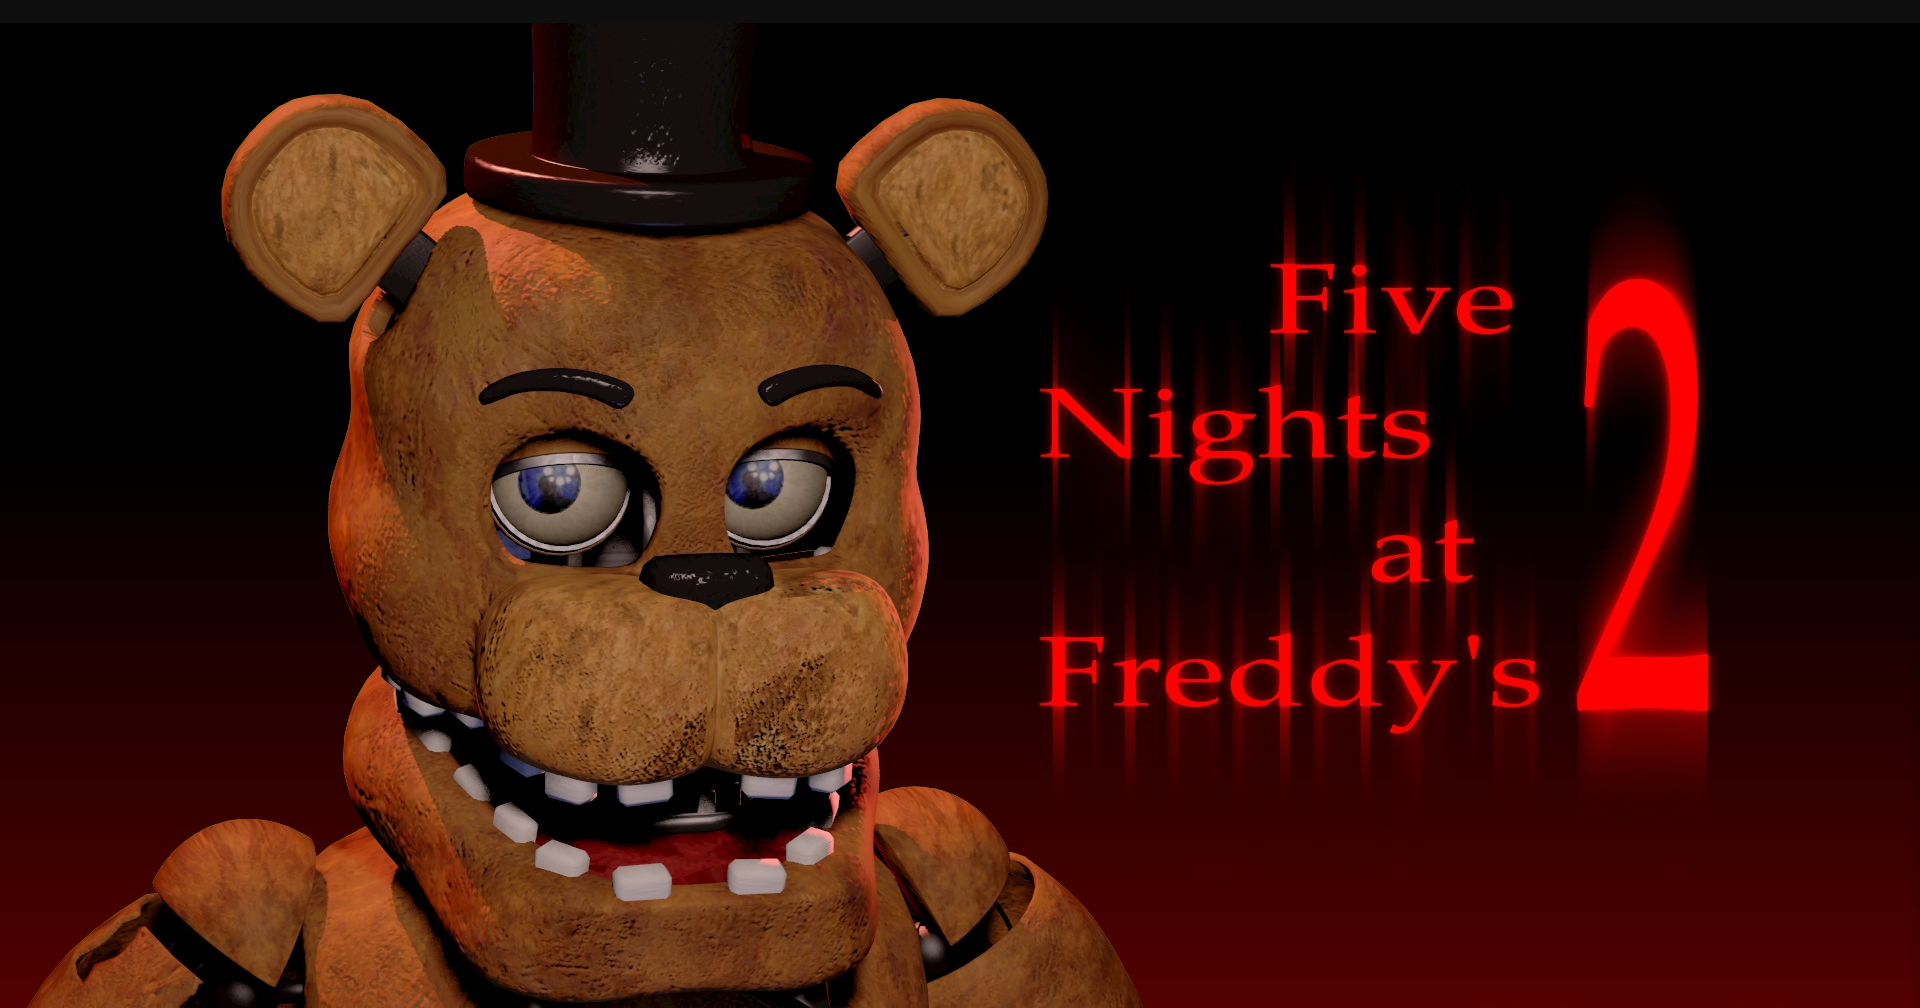 Five Nights at Freddy's 2 Unblocked Game